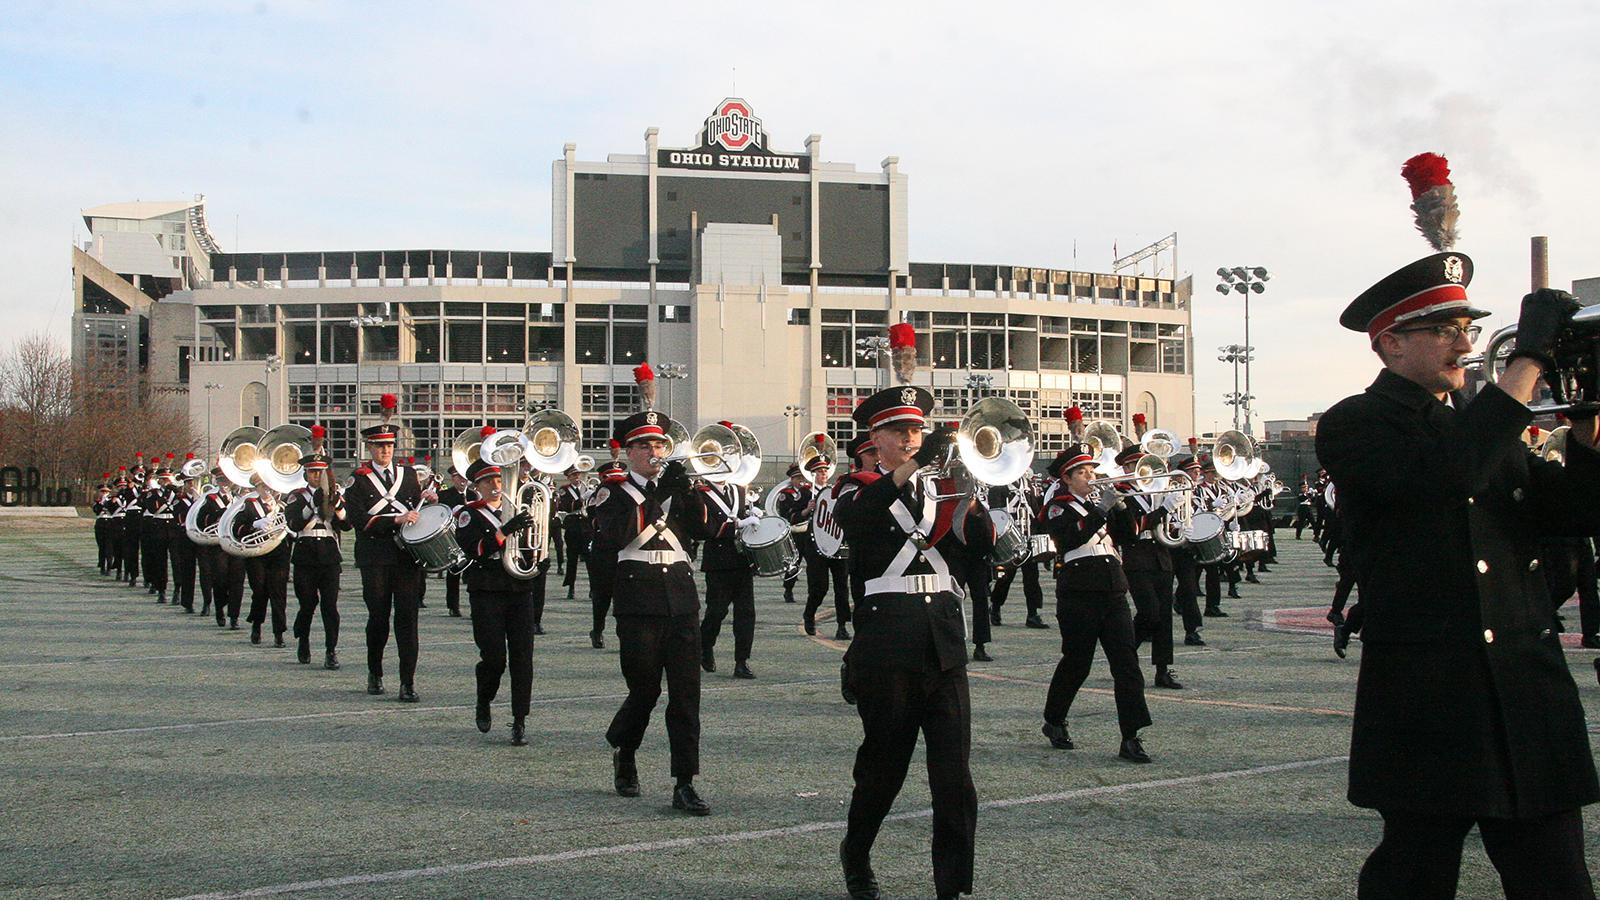 Marching band students warm up before a football game